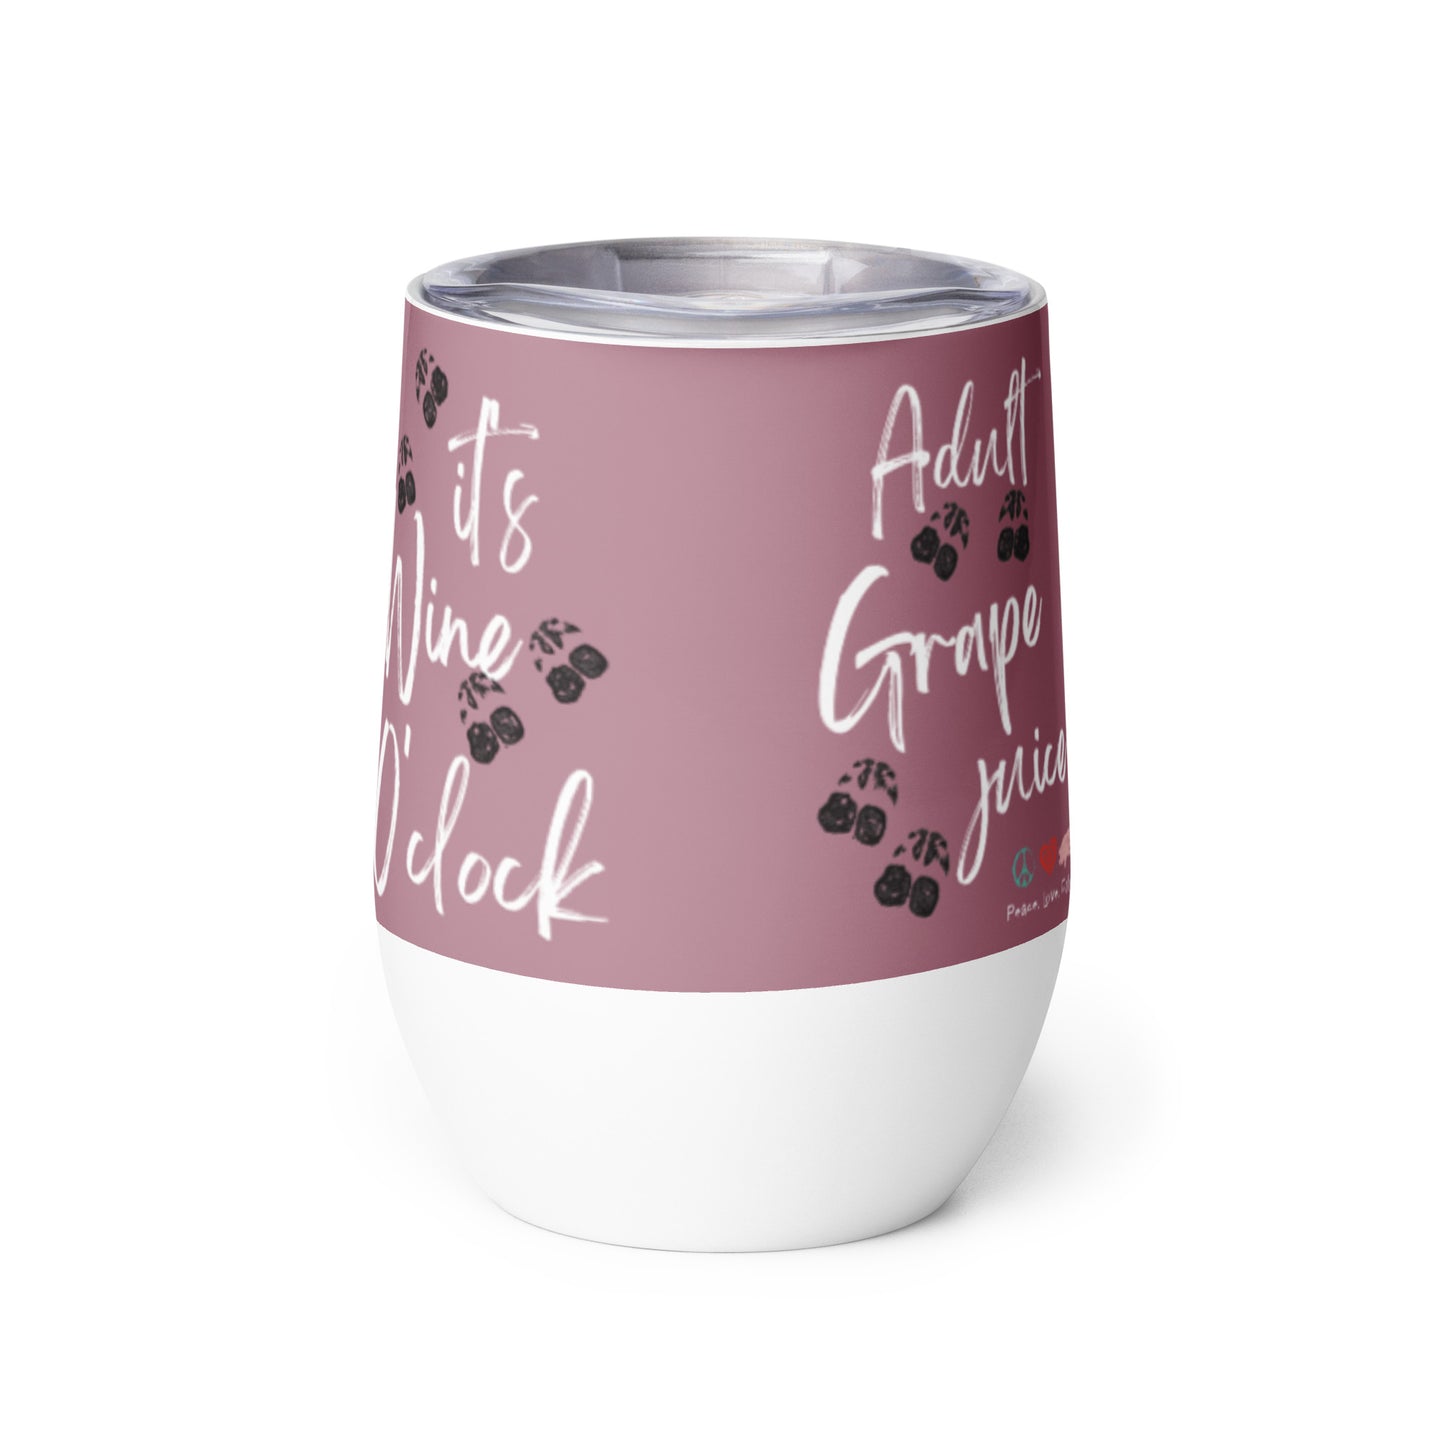 I'll be there in a Pig-secco! (Prosecco)- Adult Grape Juice Holder - Tumbler- Mug- Rose